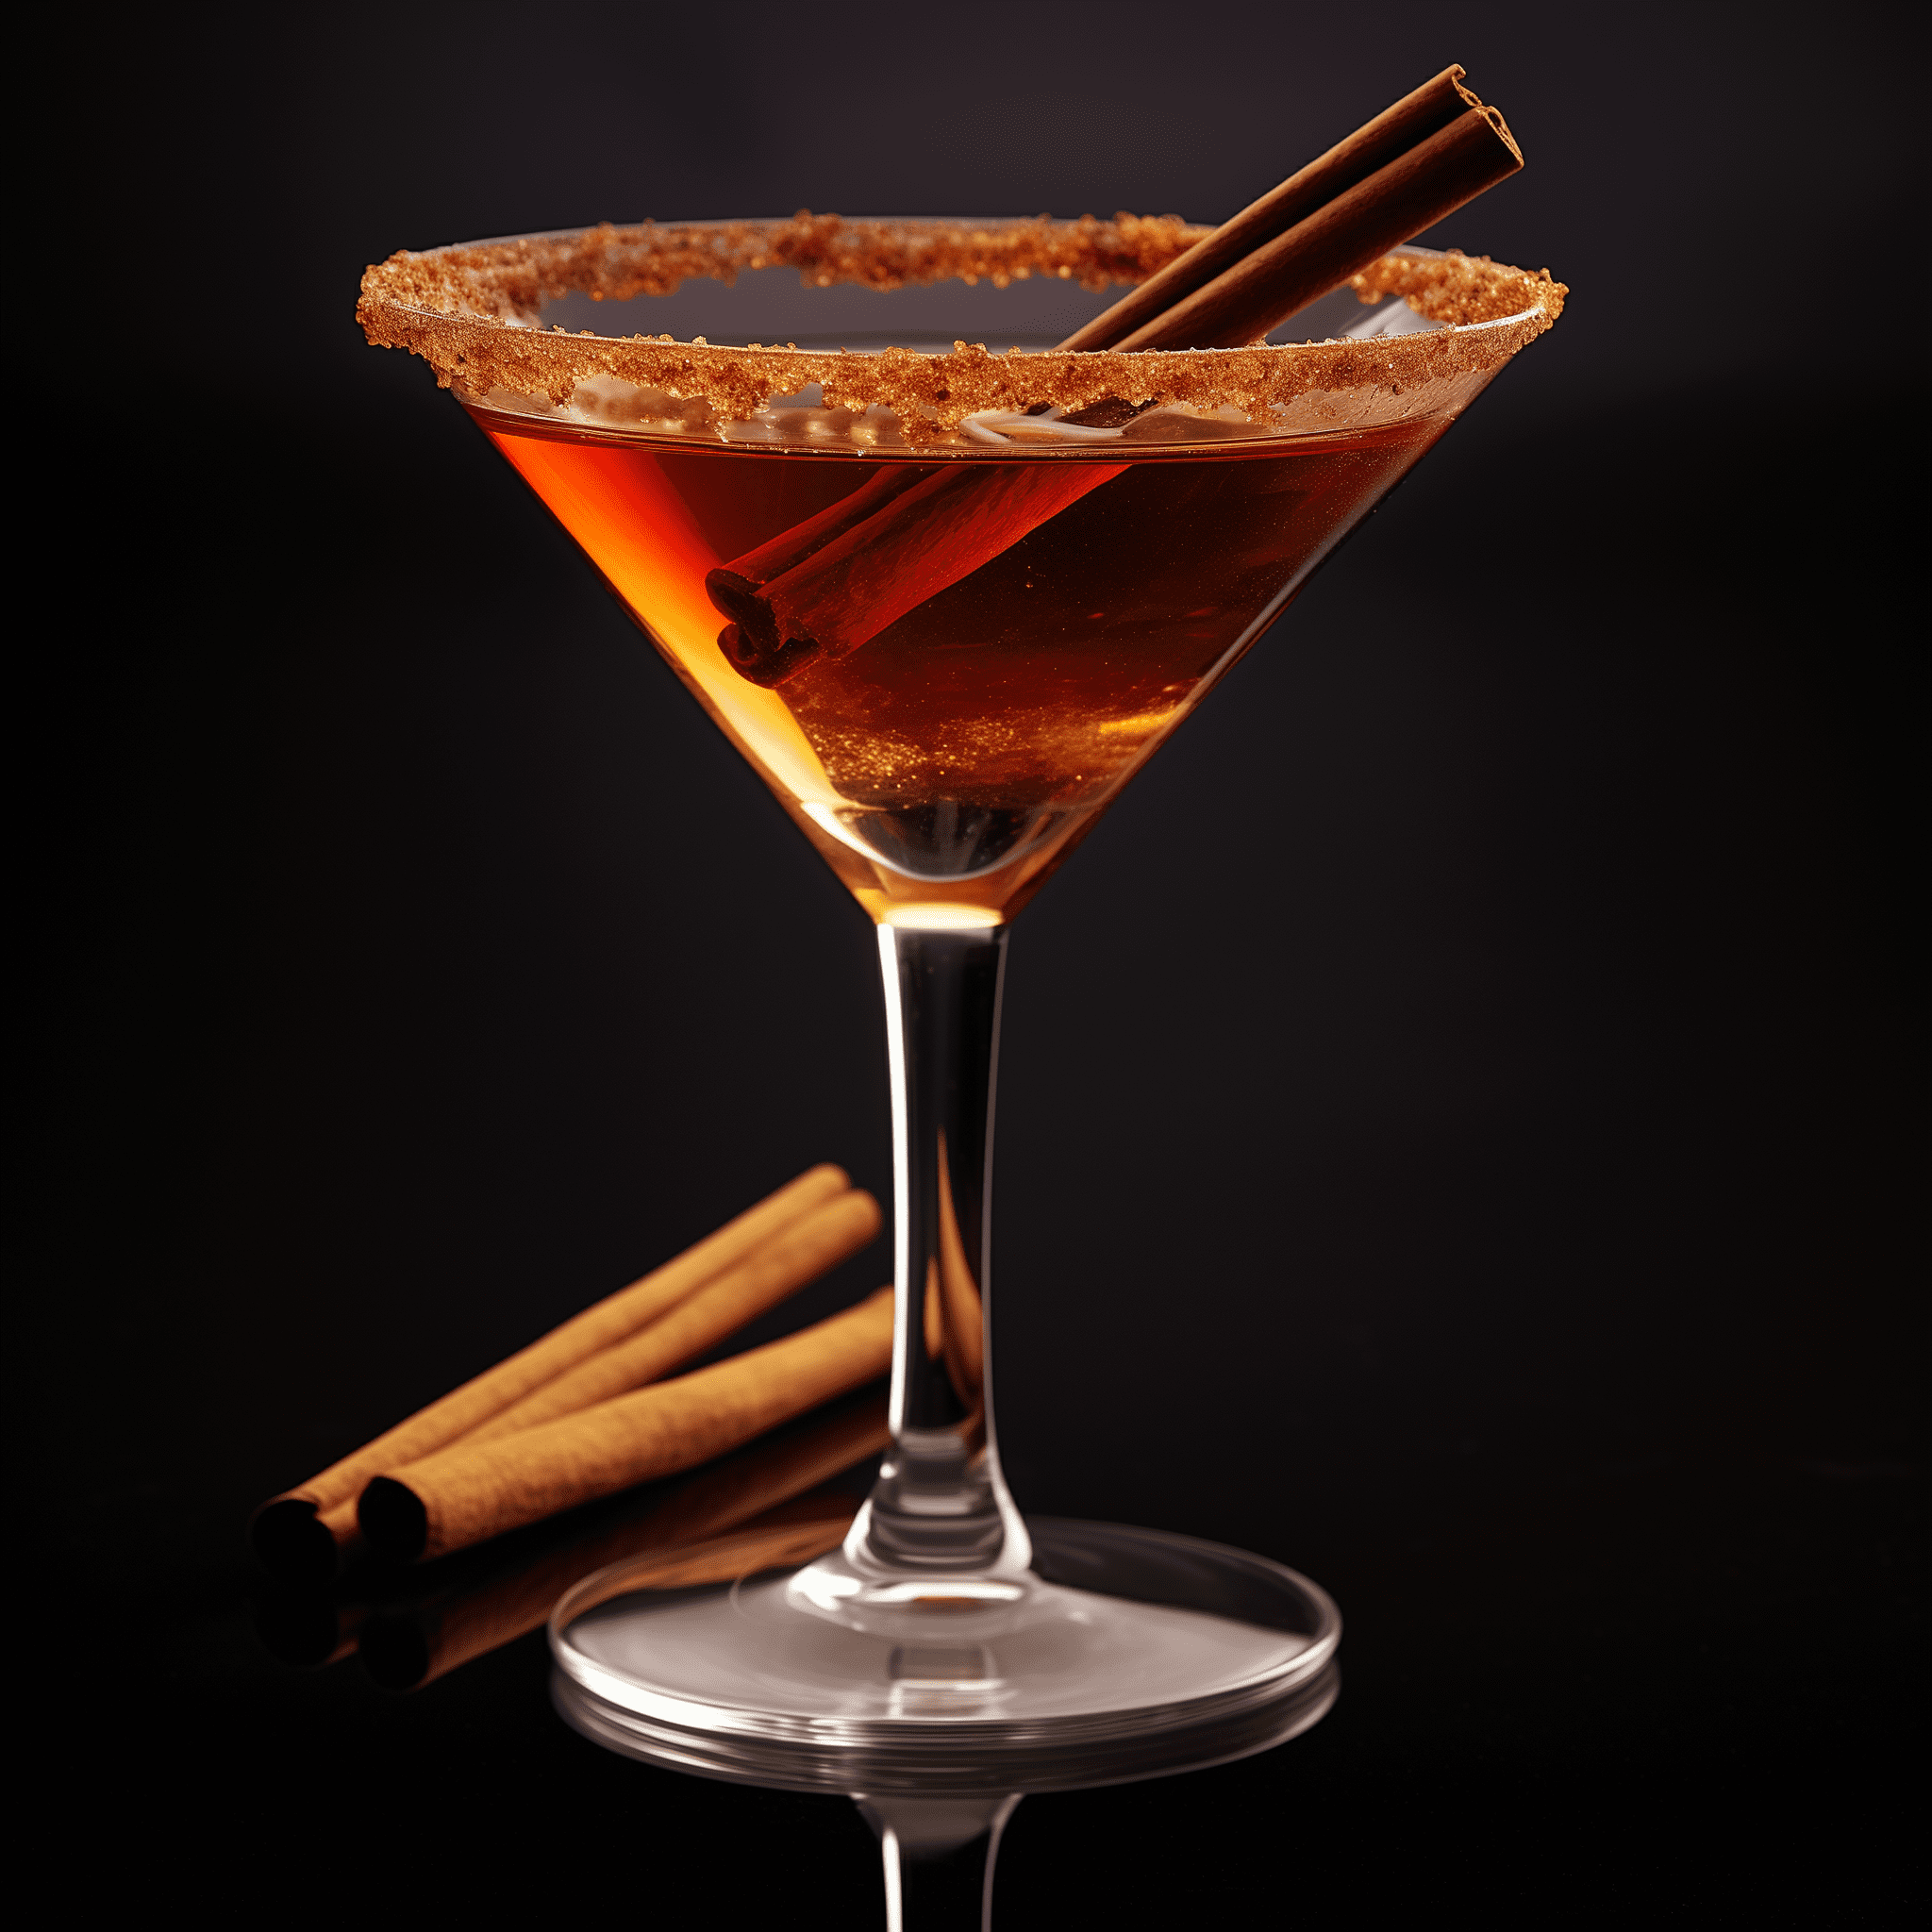 Red October Cocktail Recipe - The Red October is a potent, fiery concoction with a pronounced cinnamon spice flavor, underpinned by herbal notes from the Jagermeister. It's a bold, warming drink with a complex flavor profile that includes sweet, spicy, and slightly minty undertones.